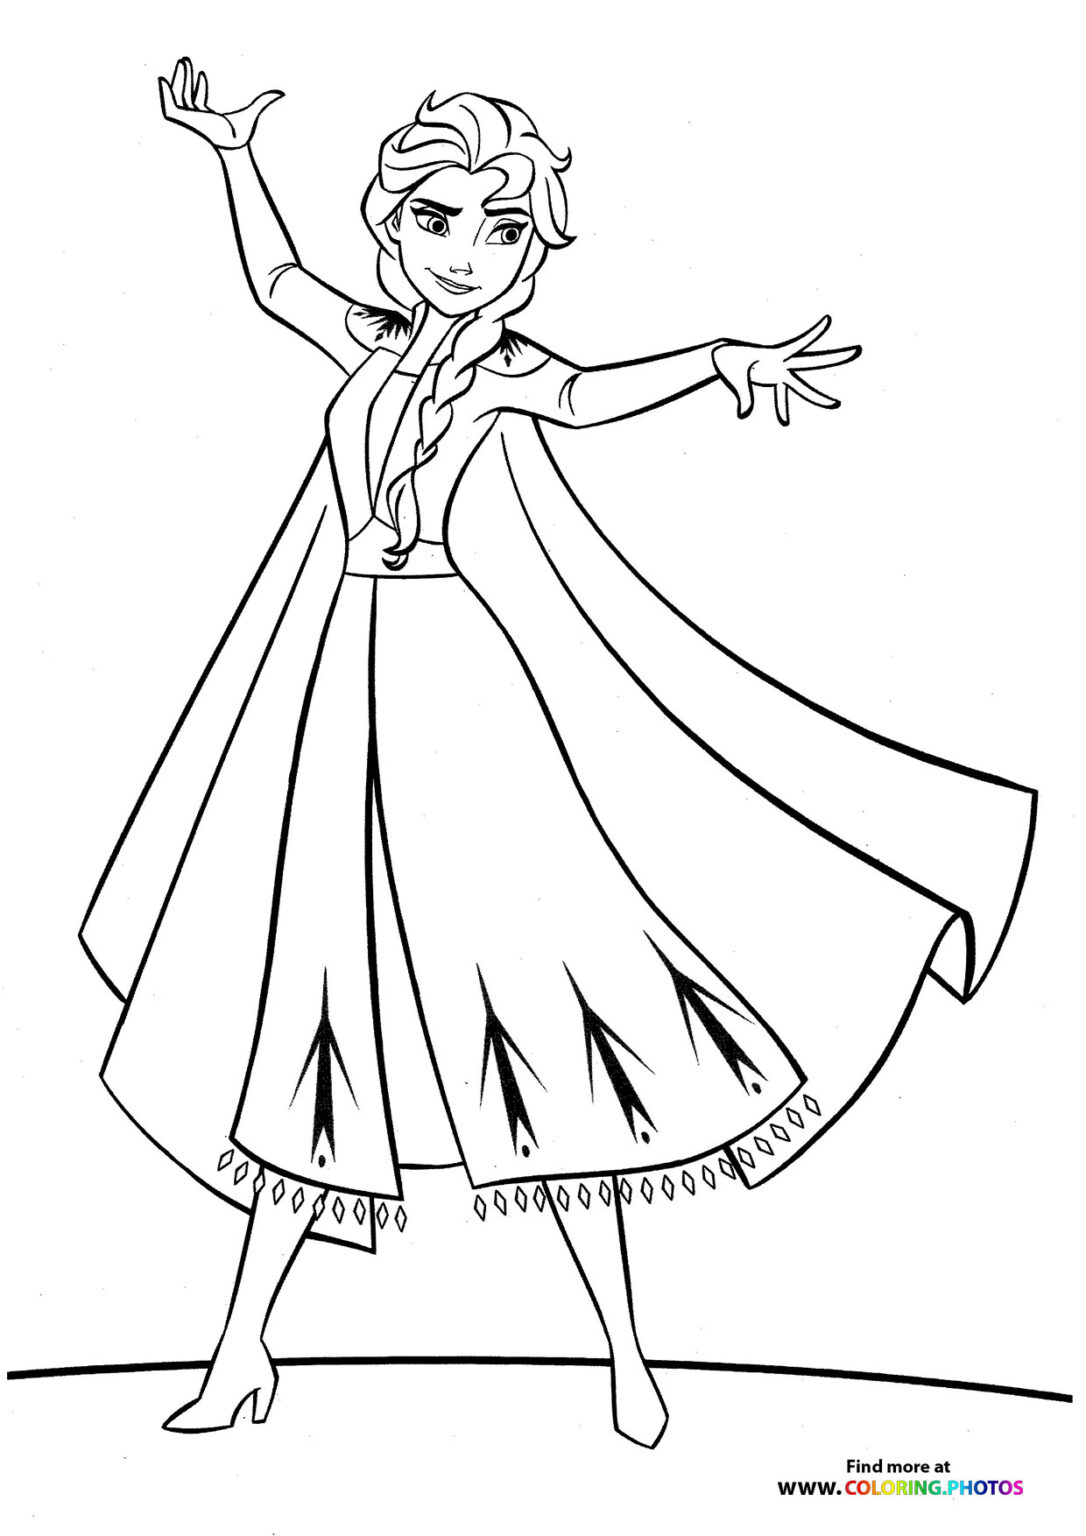 Elsa from Frozen - Coloring Pages for kids | Free and easy print